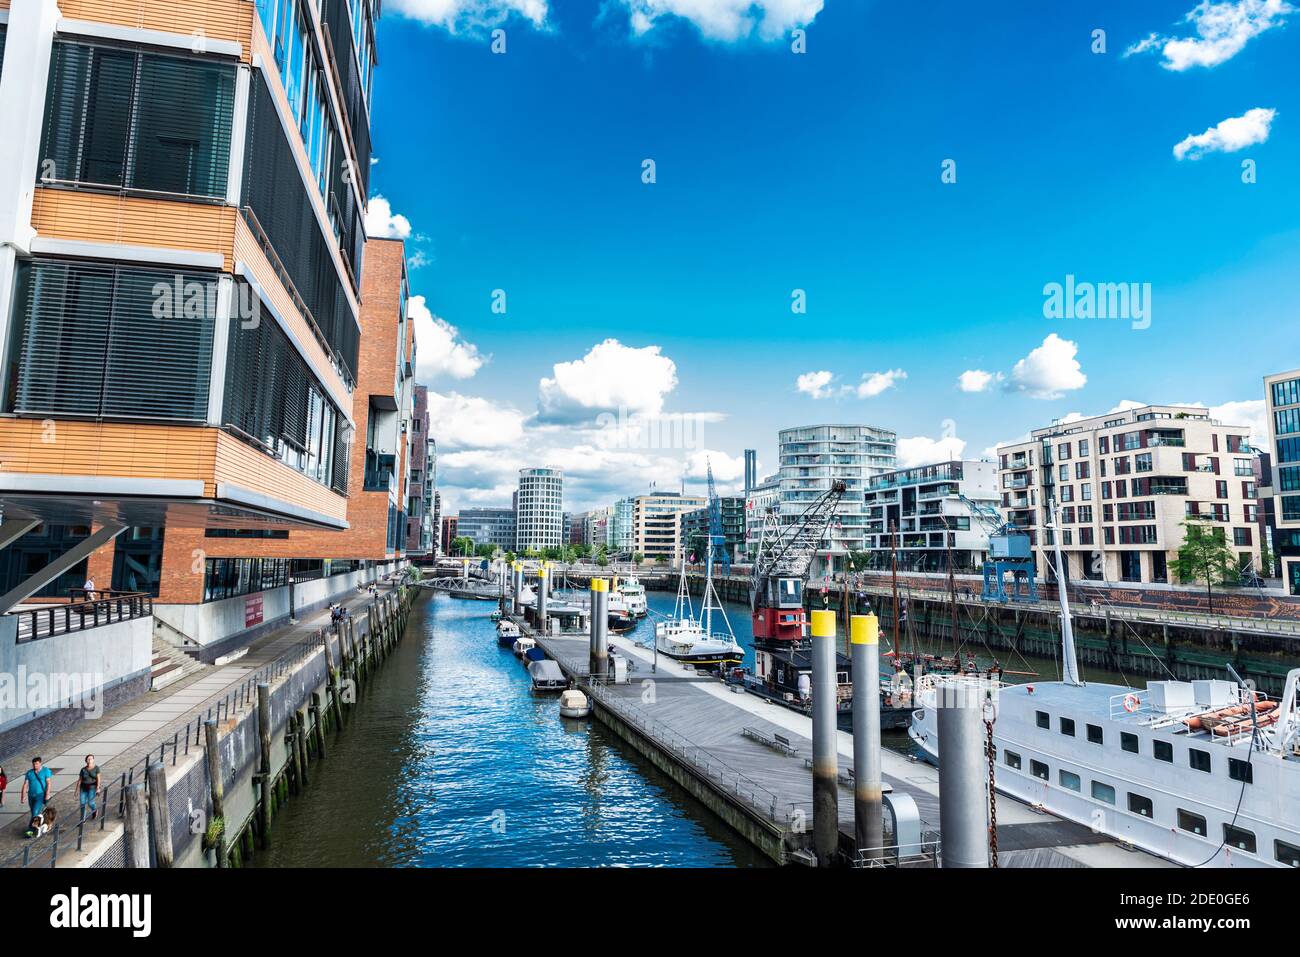 Hamburg, Germany - August 21, 2019: Modern buildings and a pier with boats and people around next to a canal in the neighborhood of HafenCity, Hamburg Stock Photo